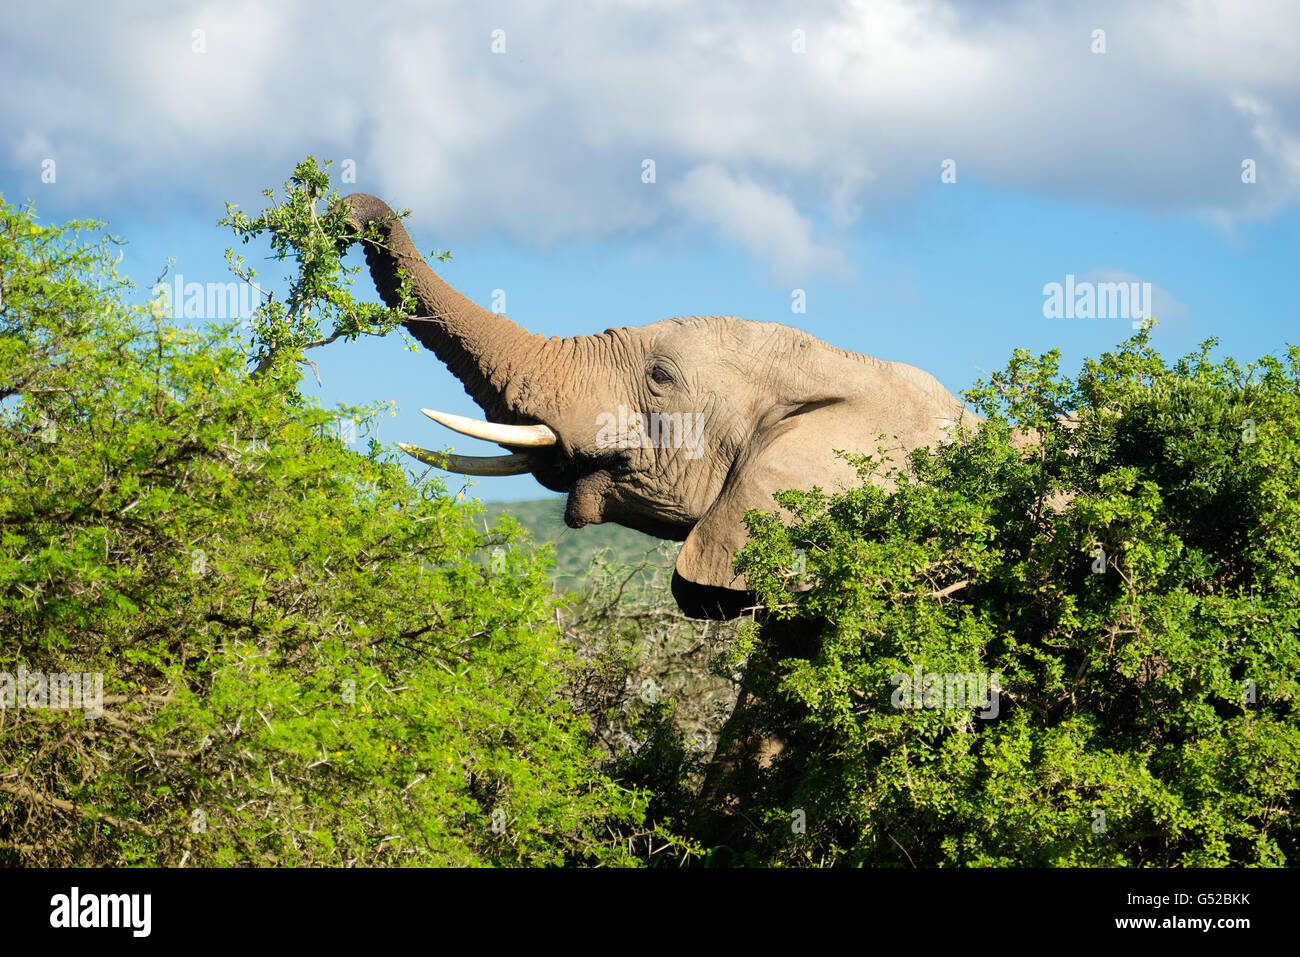 South Africa, Eastern Cape, Western District, Addo Elephant National Park, Elephant eats hidden behind trees Stock Photo